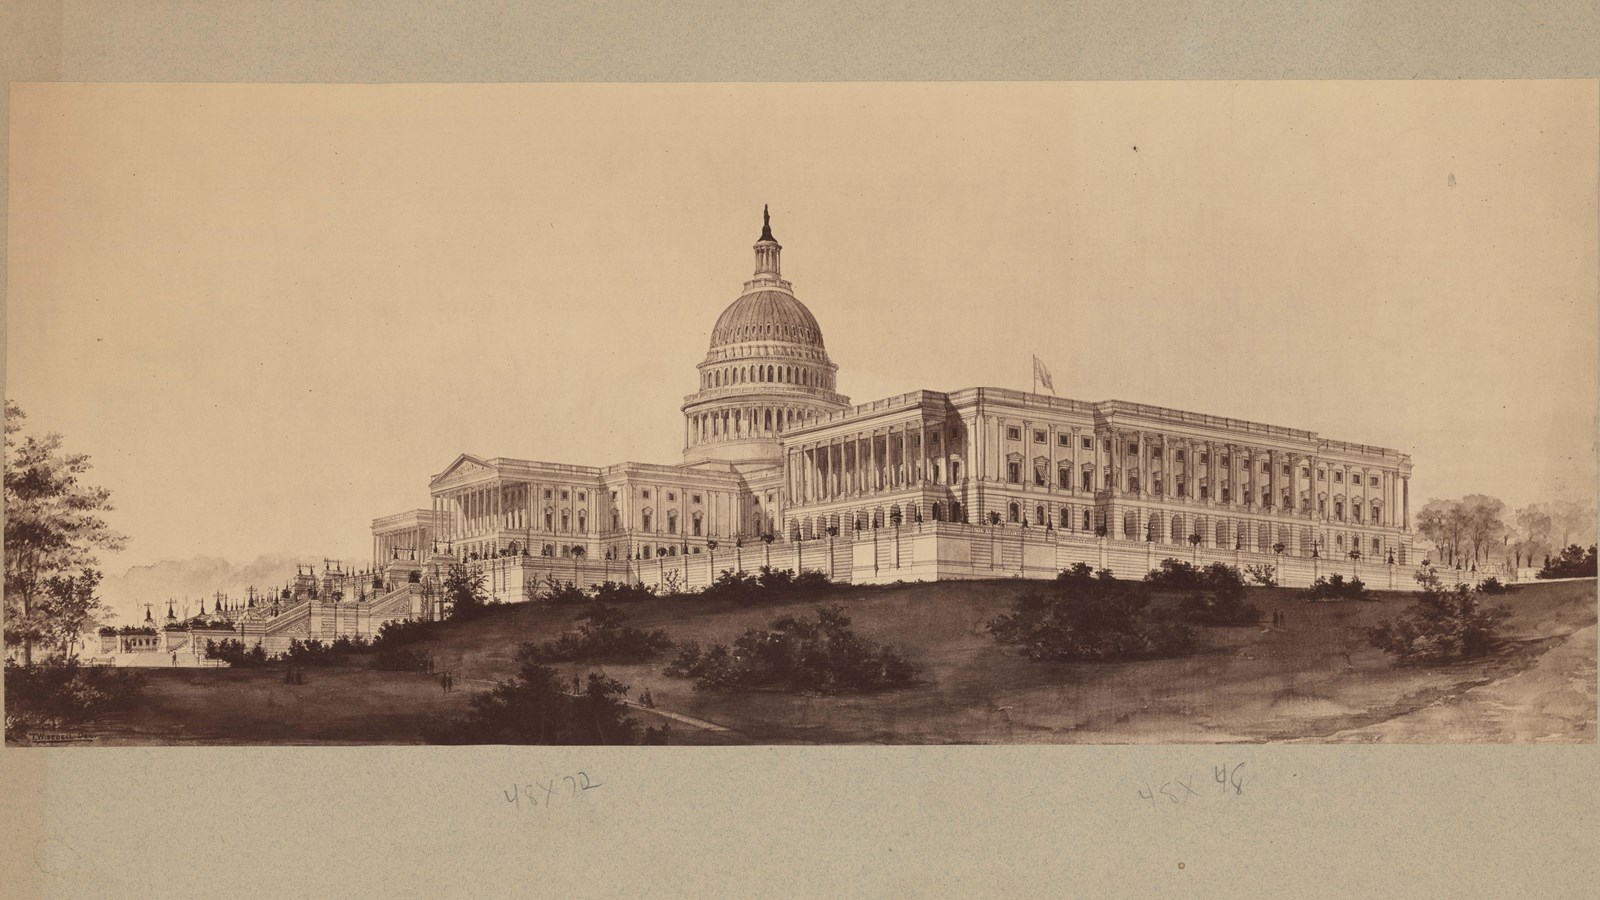 Pencil drawing of large symmetrical building with dome on top on grassy hill with shrubs around